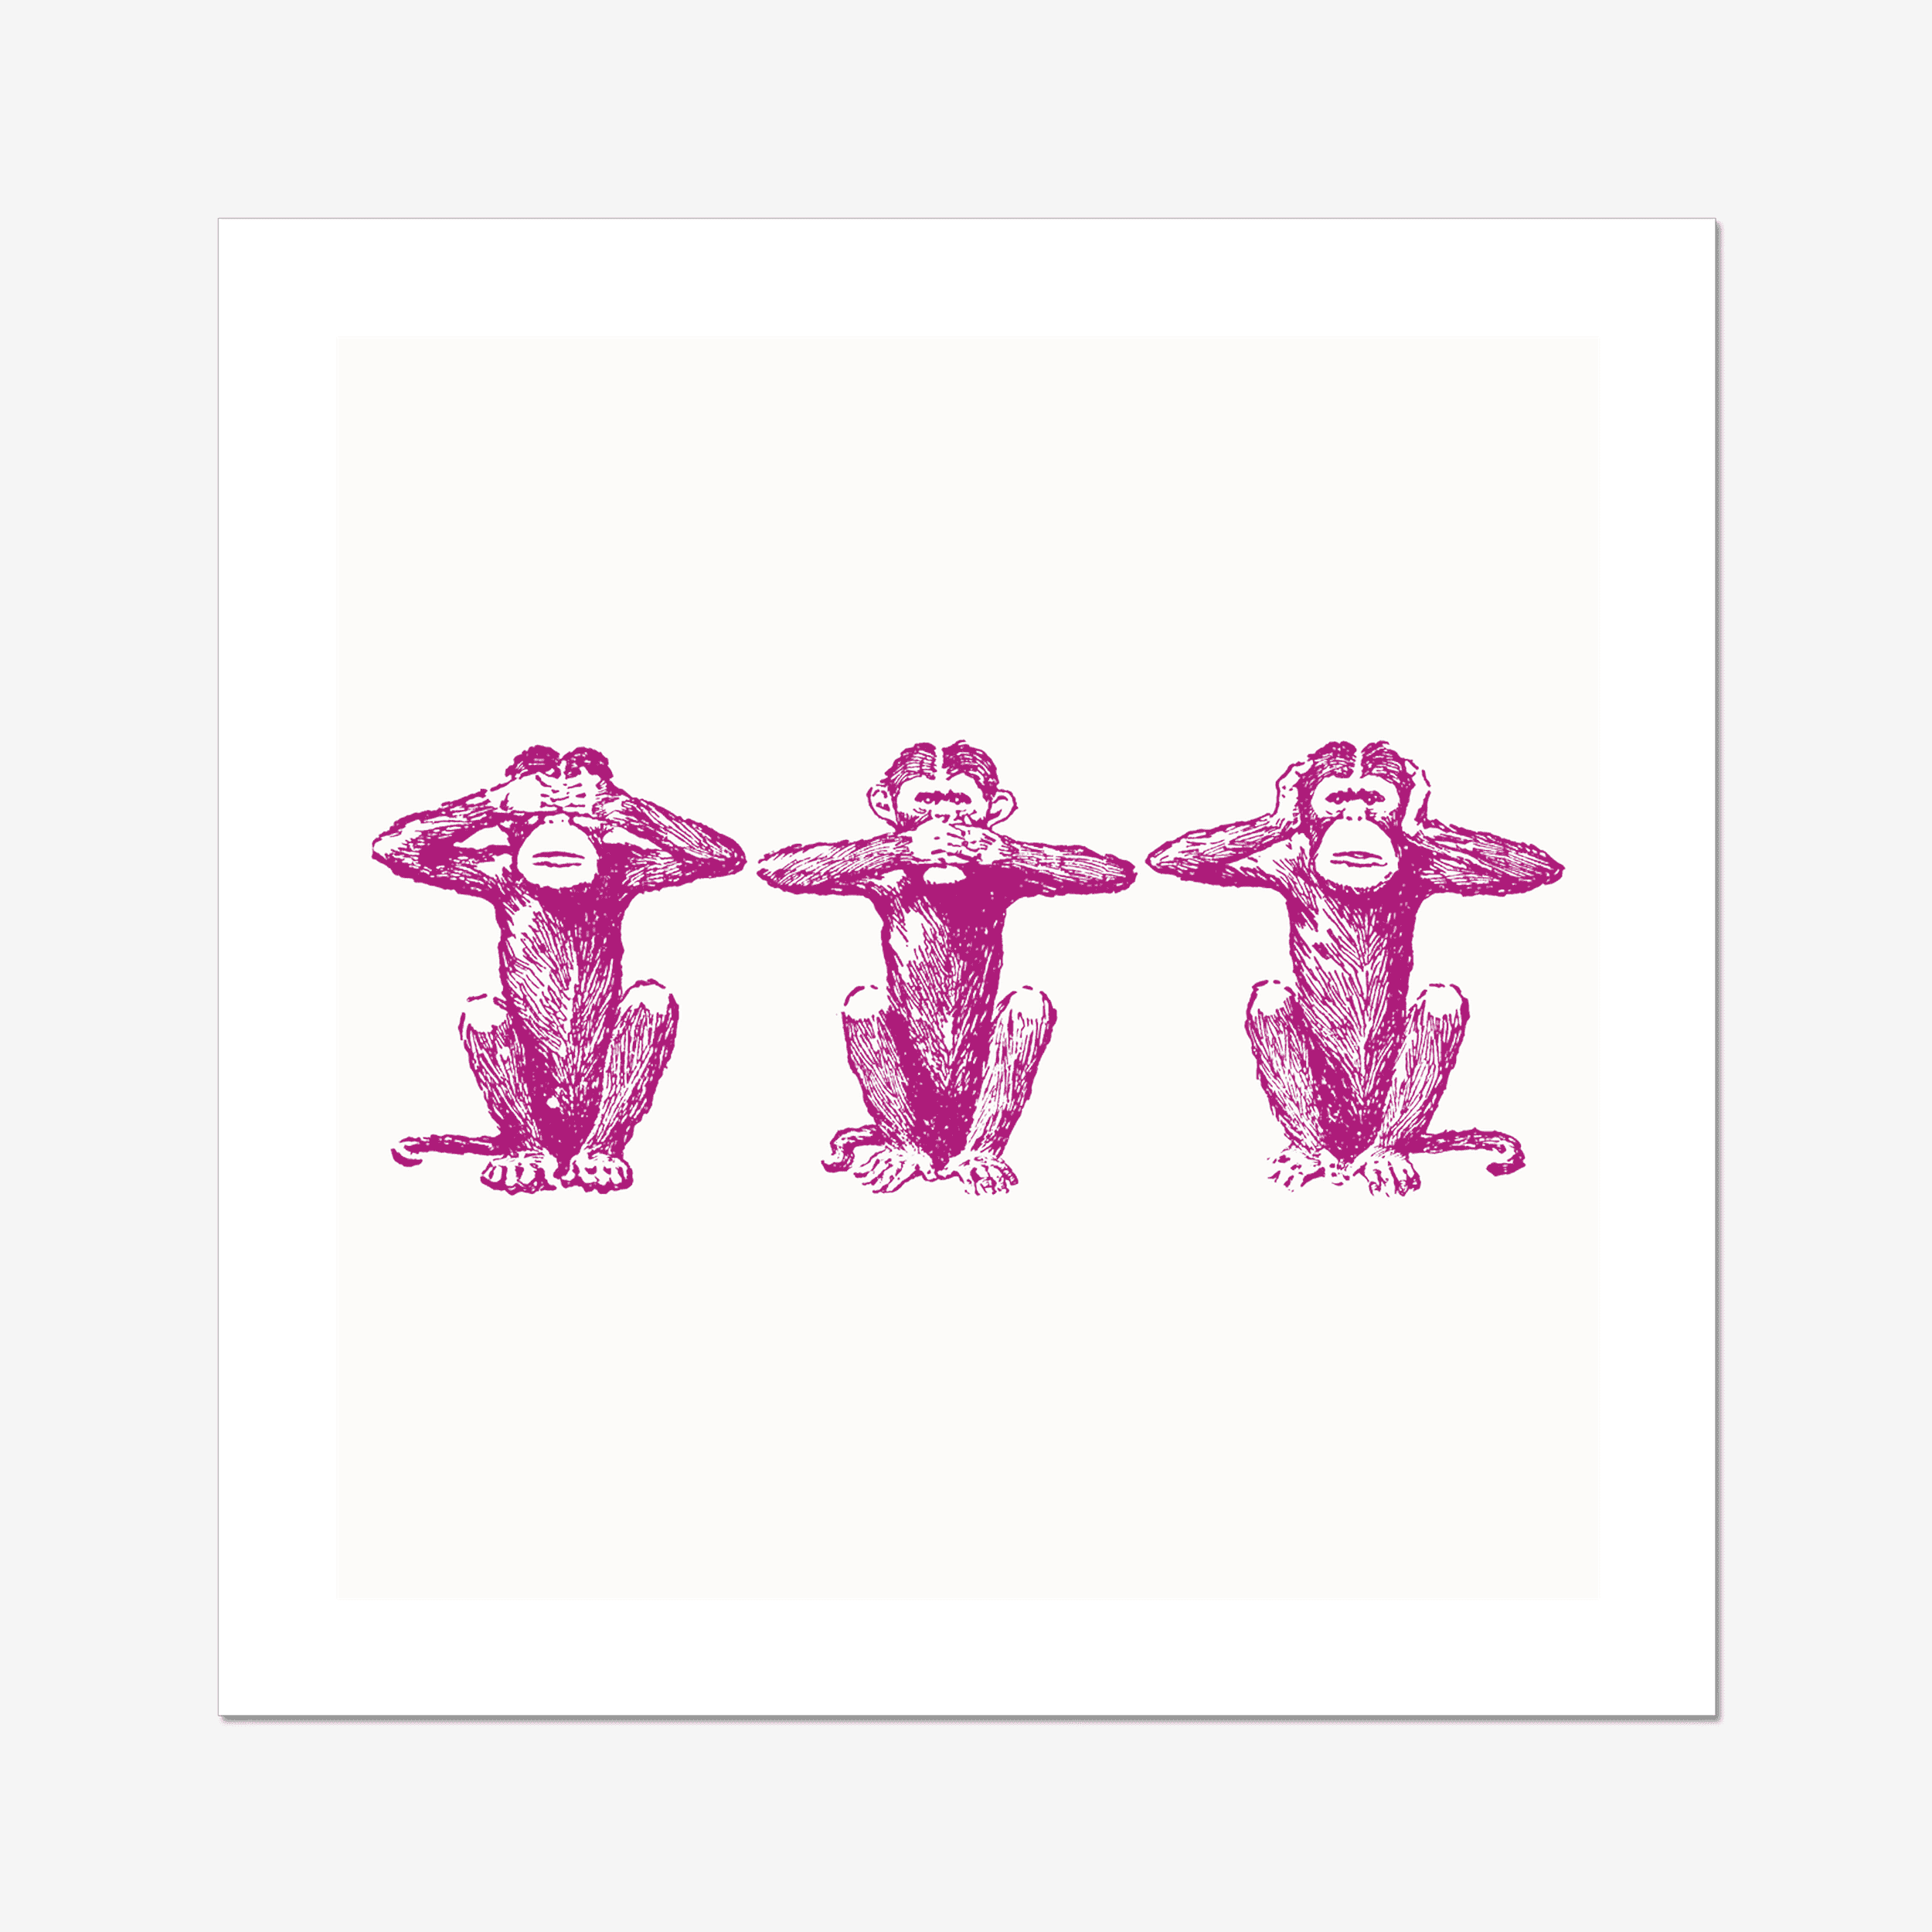 Three　print　quirky　wall　pink　Cuddles　square　wise　–　In　The　Kitchen　monkeys,　art